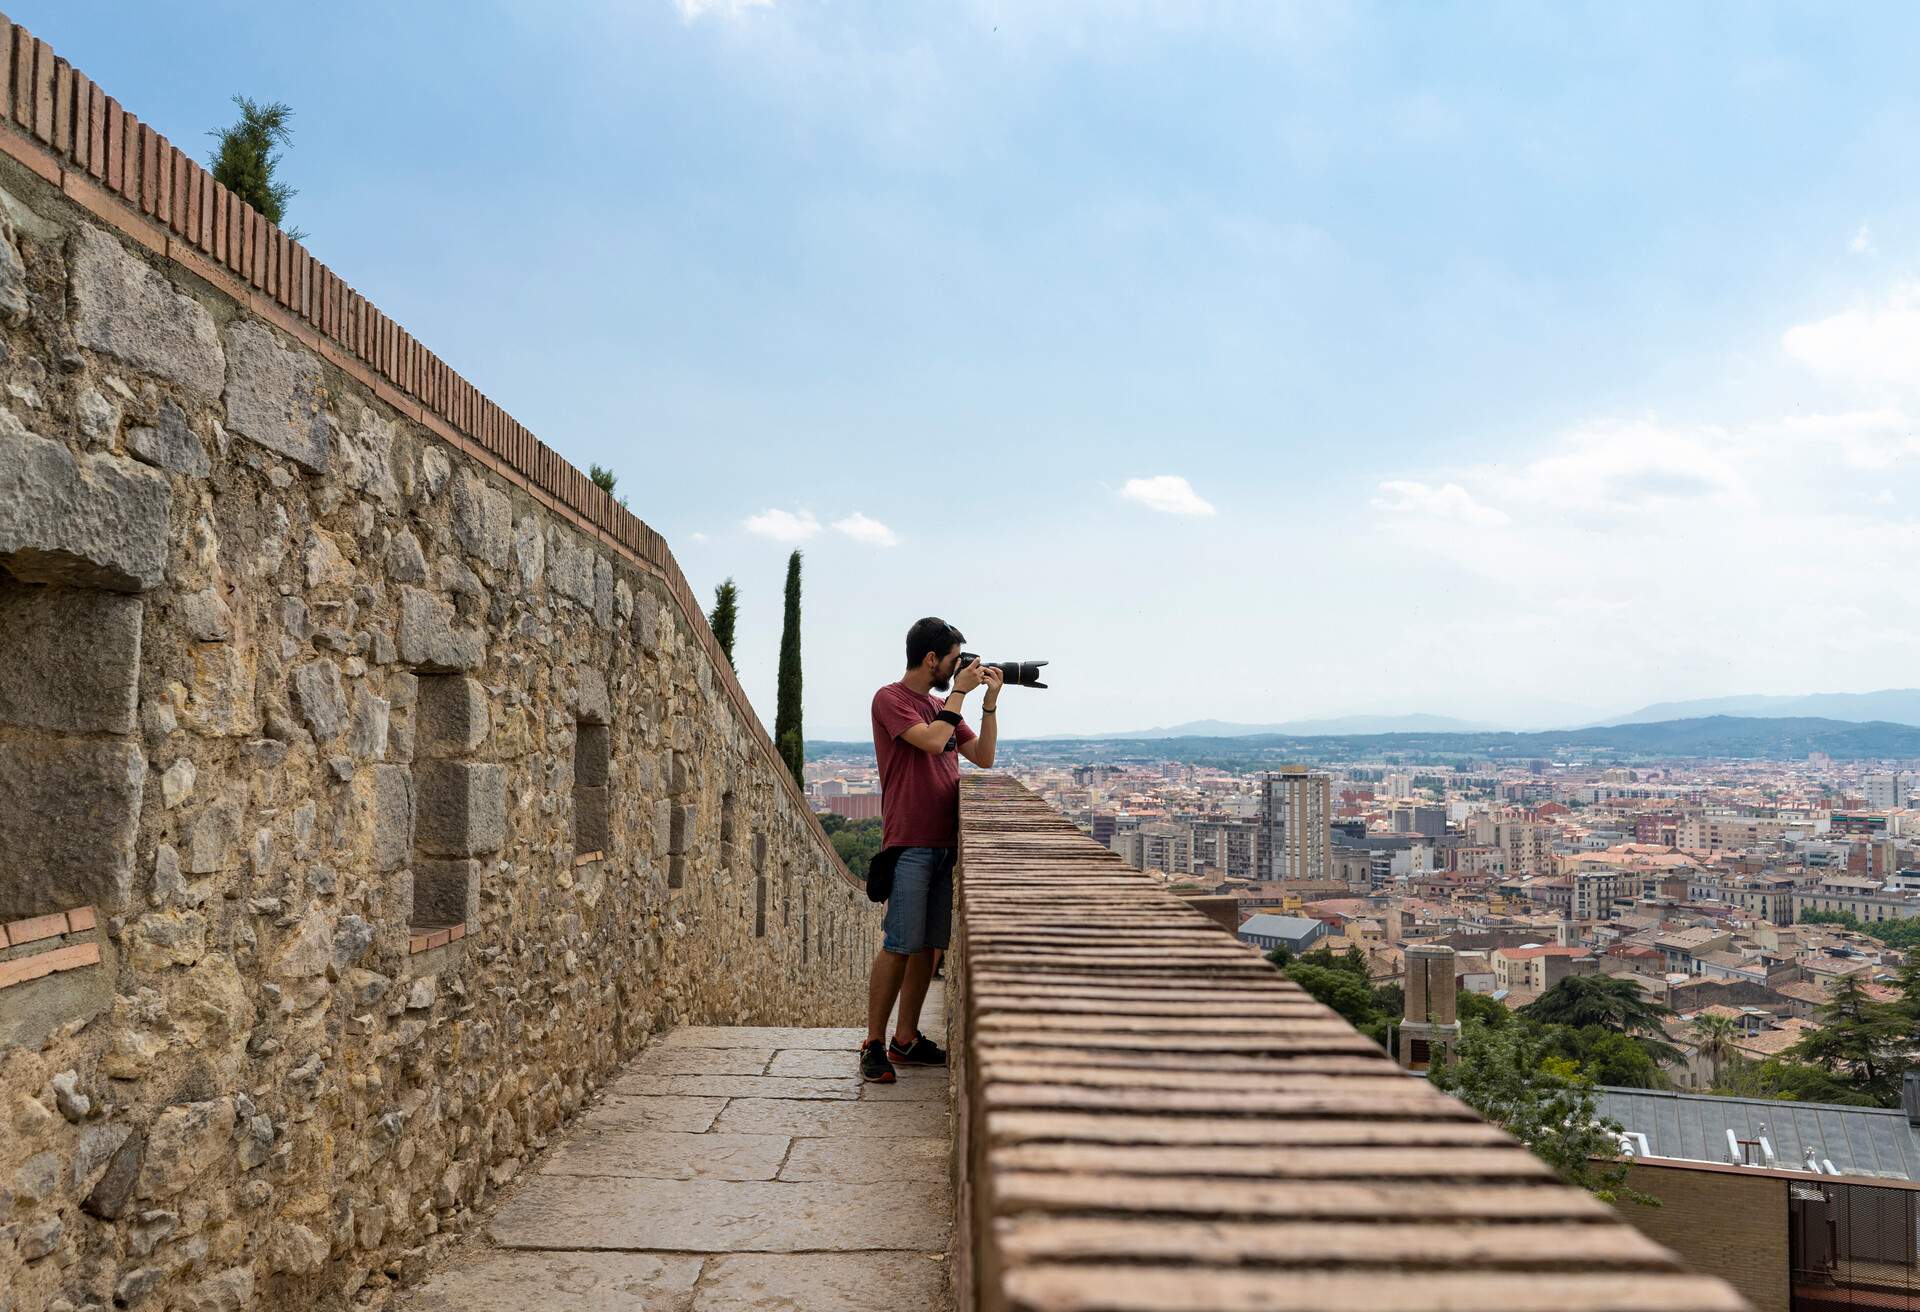 A man in an elevated area taking a picture of the populated urban area.